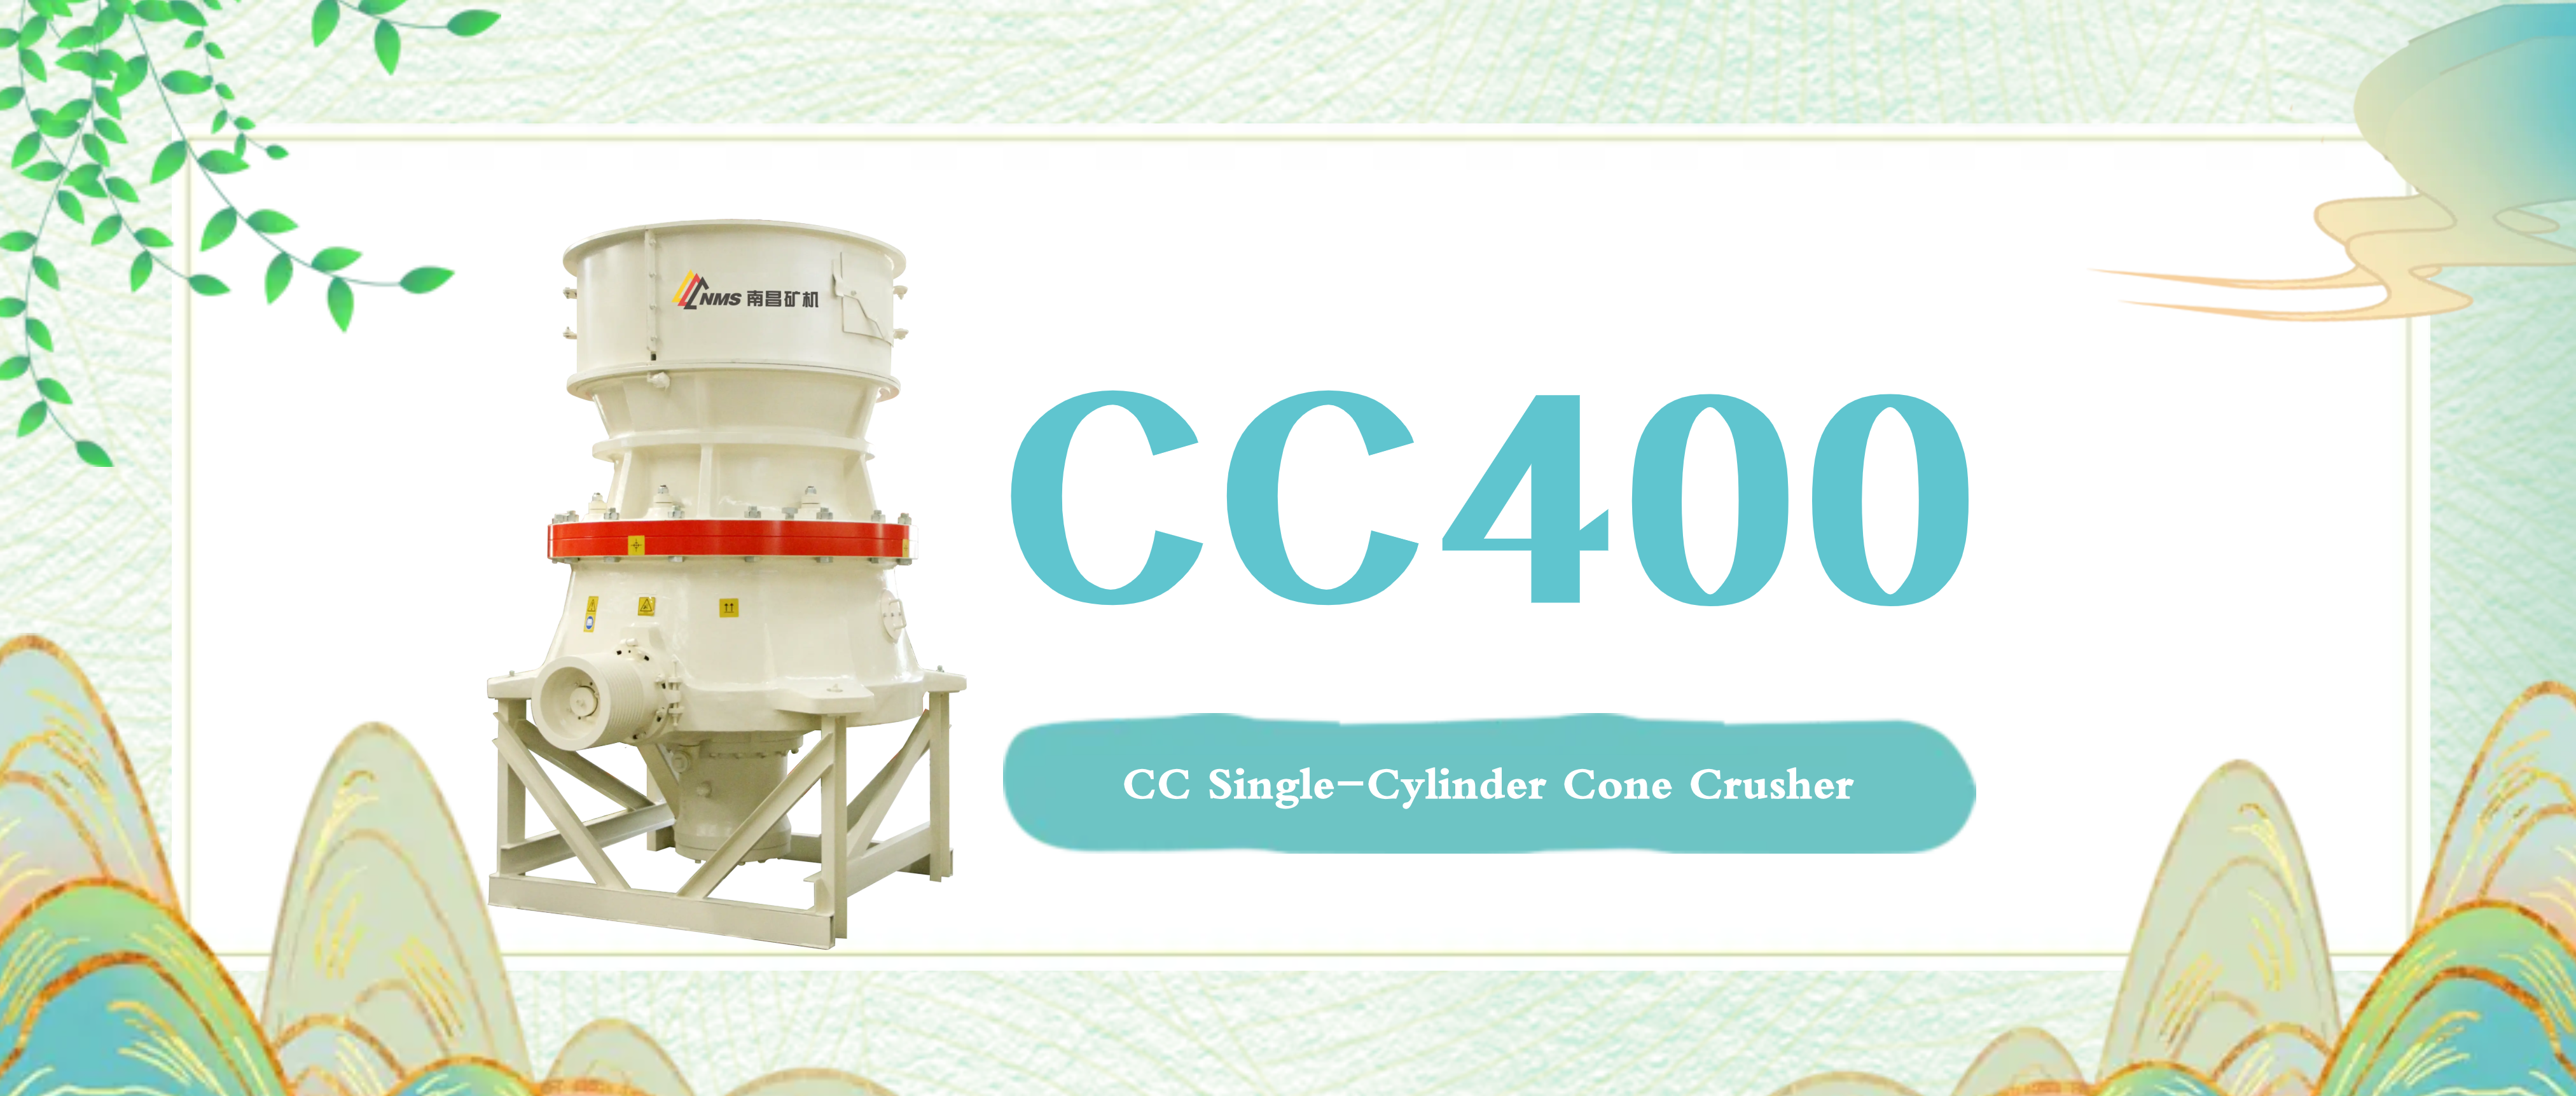 NMS CC400 cone crusher: why is it popular for many years?